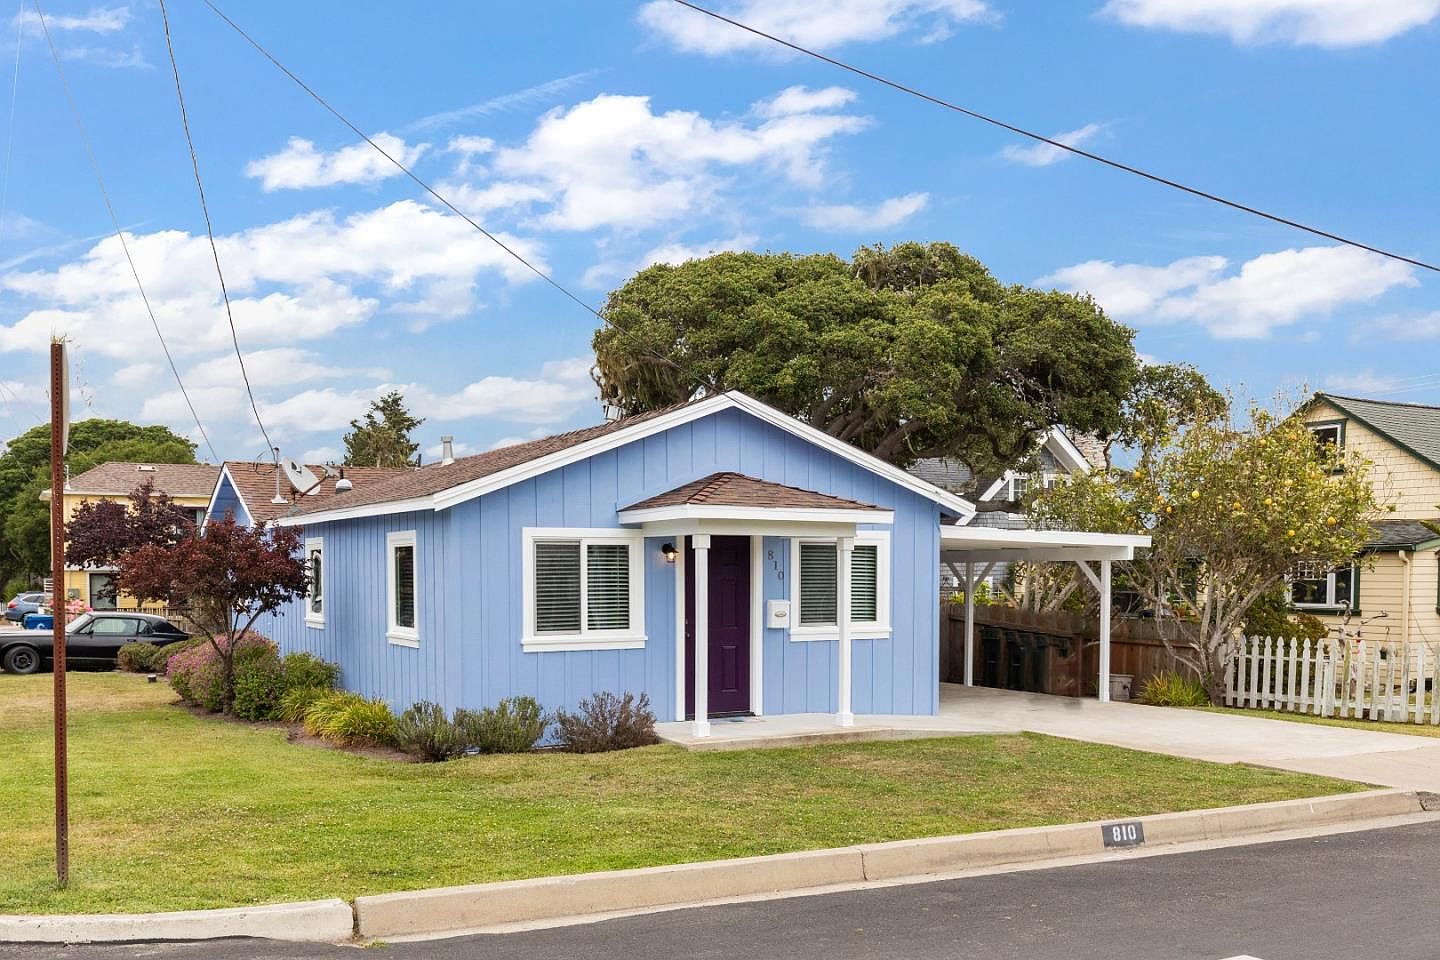 Ocean View - Pacific Grove Real Estate - 1 Homes For Sale - Zillow